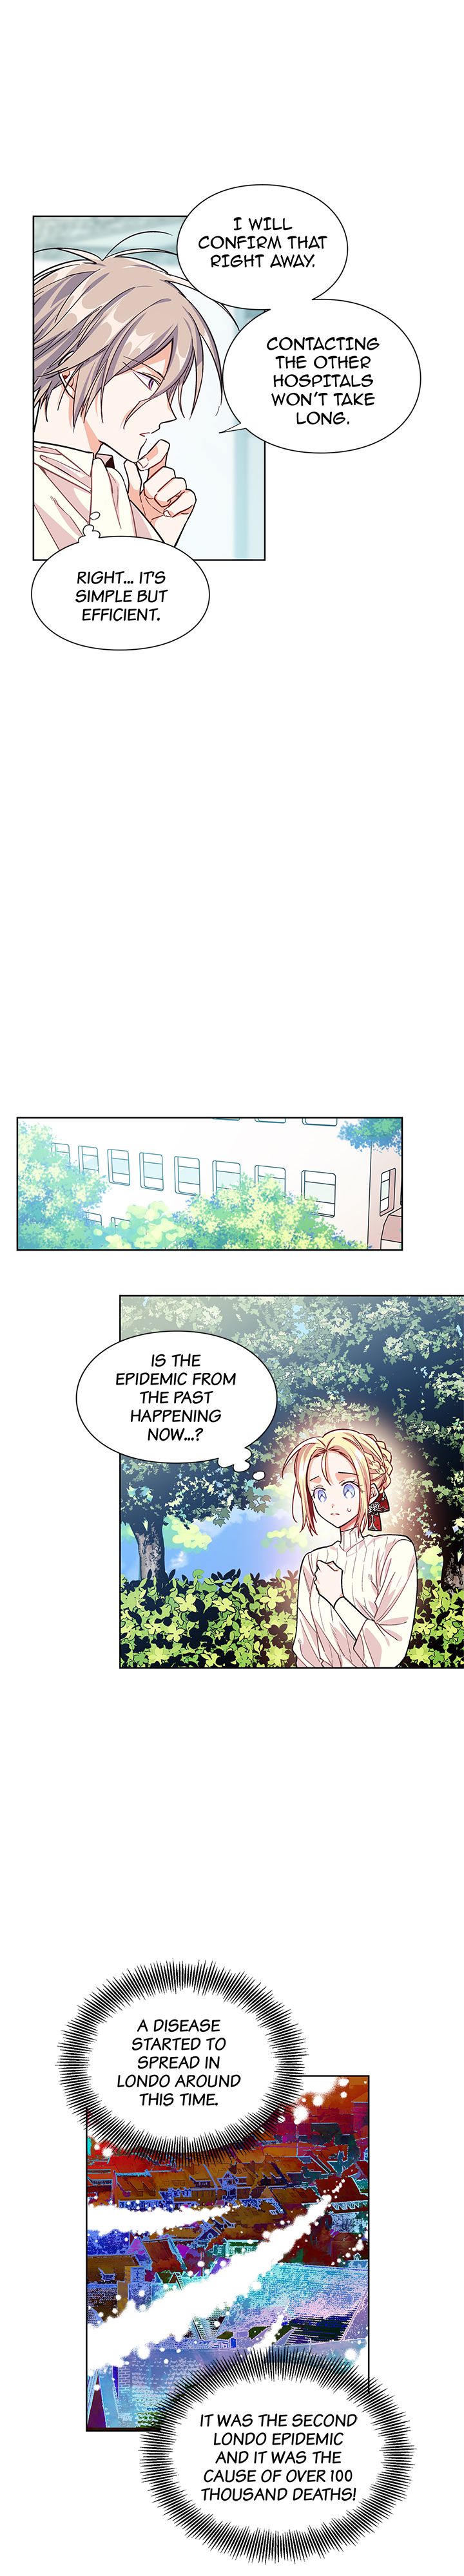 Doctor Elise – The Royal Lady with the Lamp - Chapter 42 Page 13